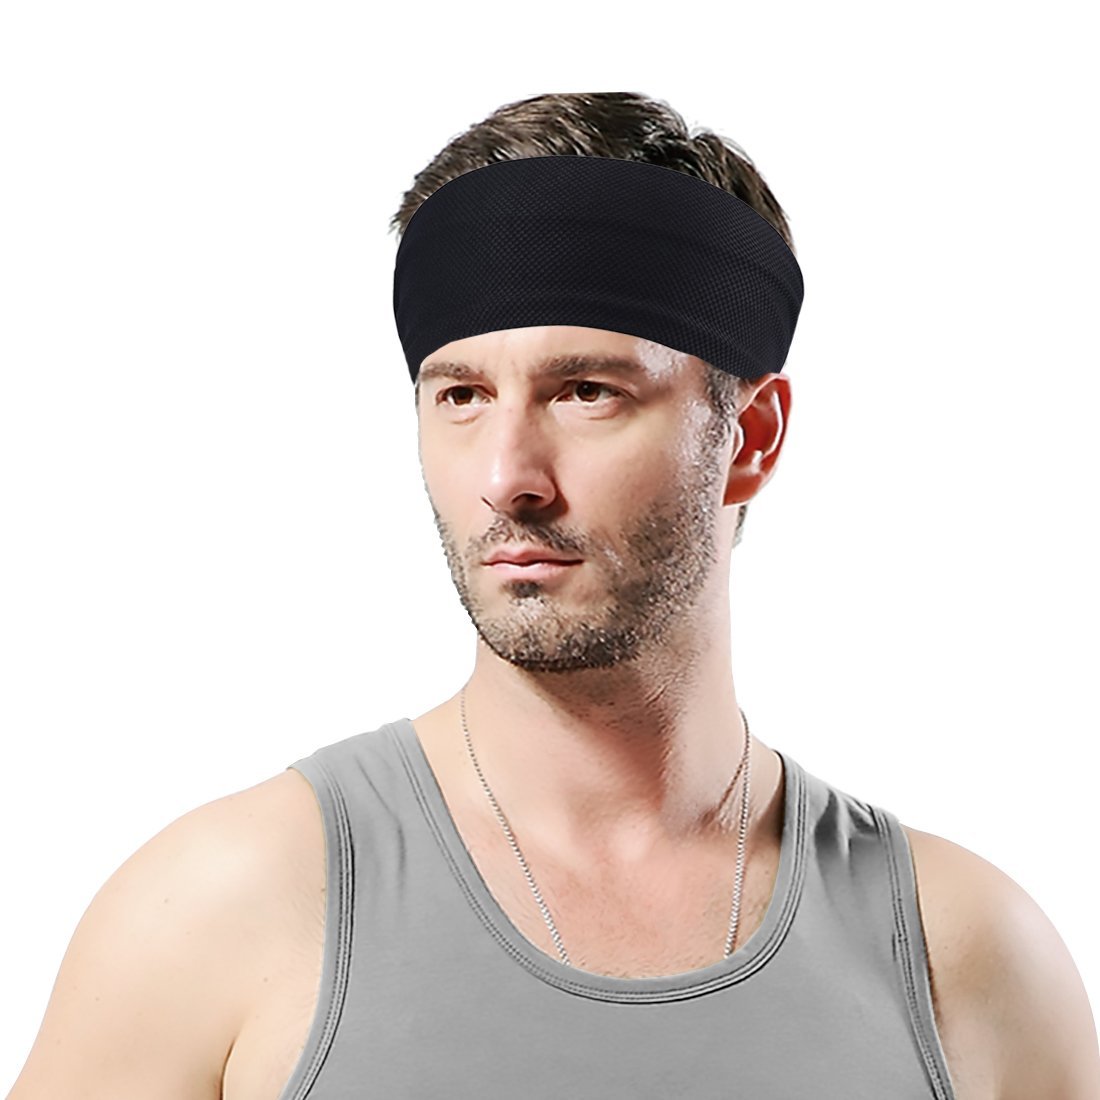 Why the Aolerx Sweatband Pullover Headband should be your first choice ...